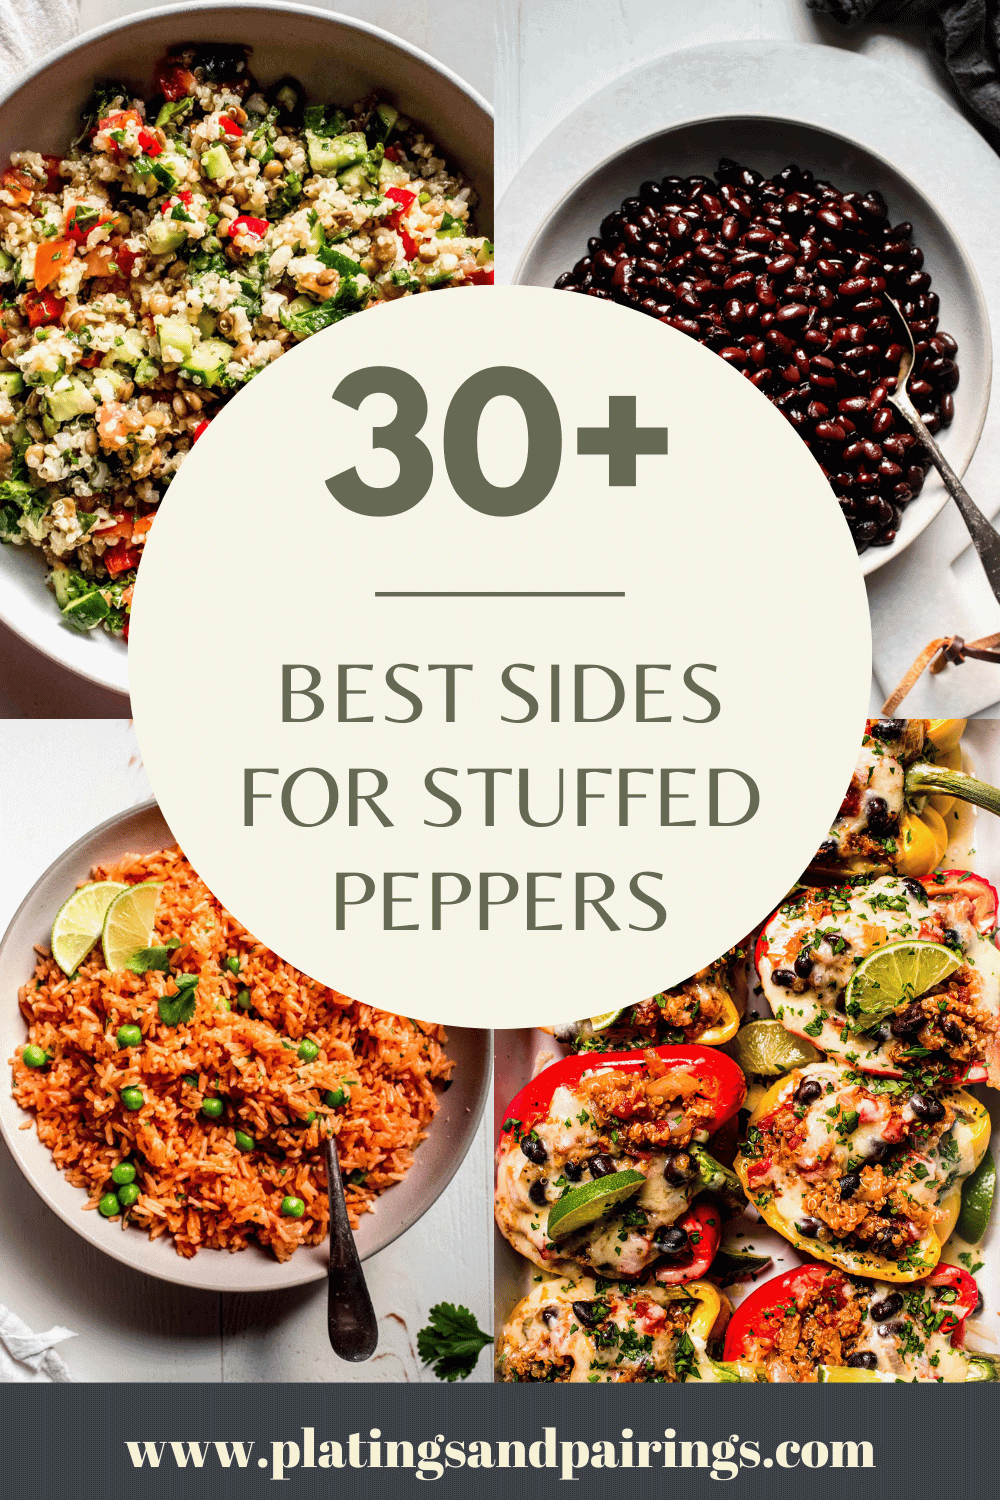 Collage of sides for stuffed peppers with text overlay.